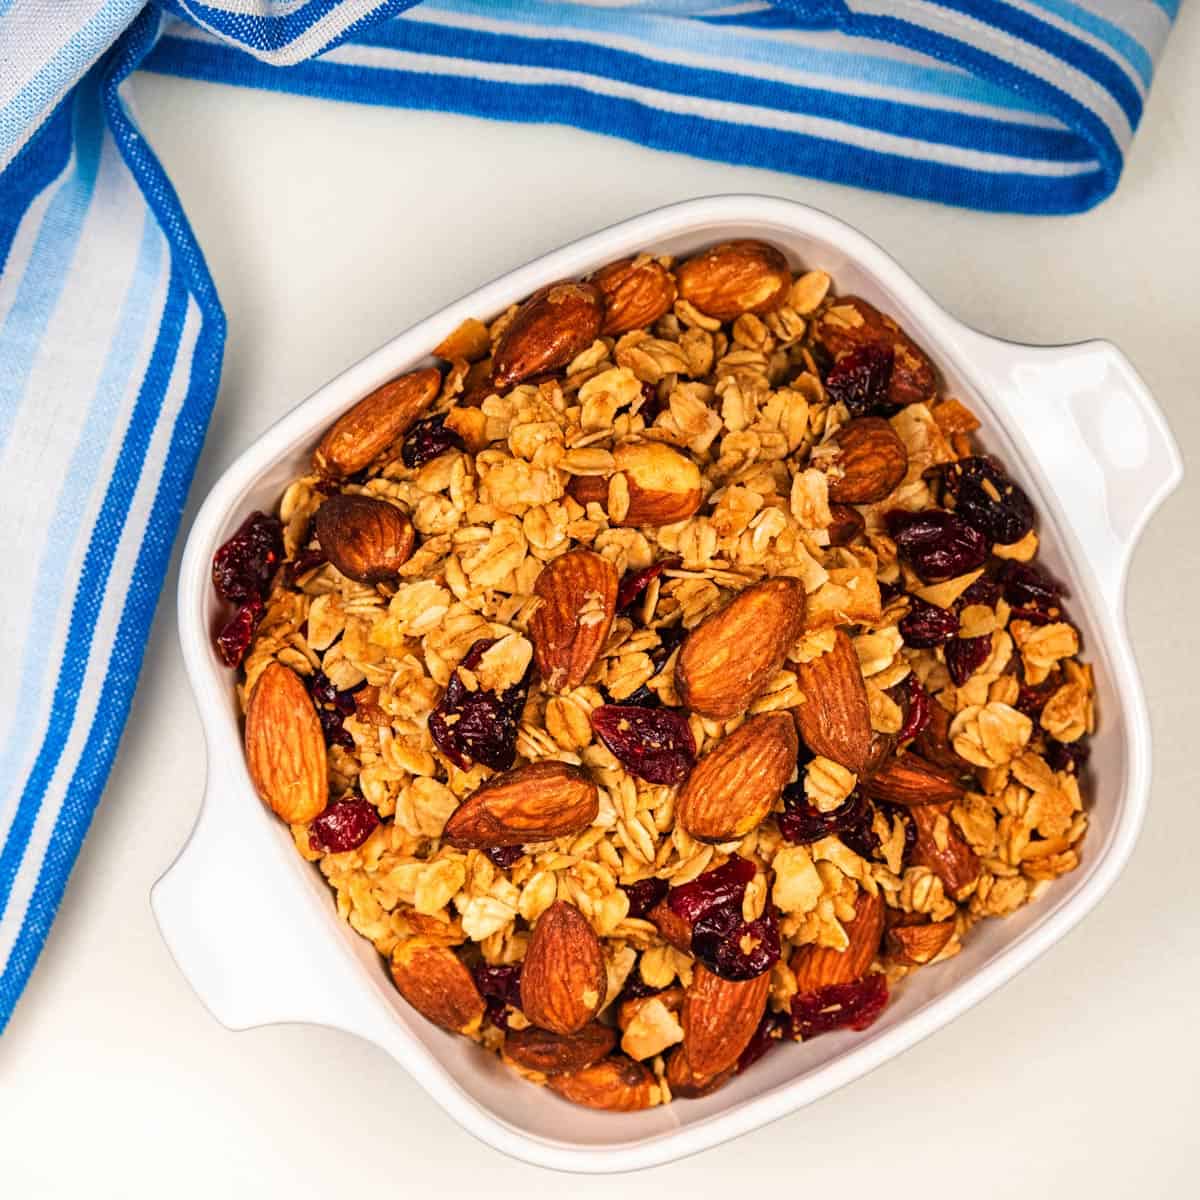 Bowl of vanilla cranberry coconut granola with almonds and cranberries.